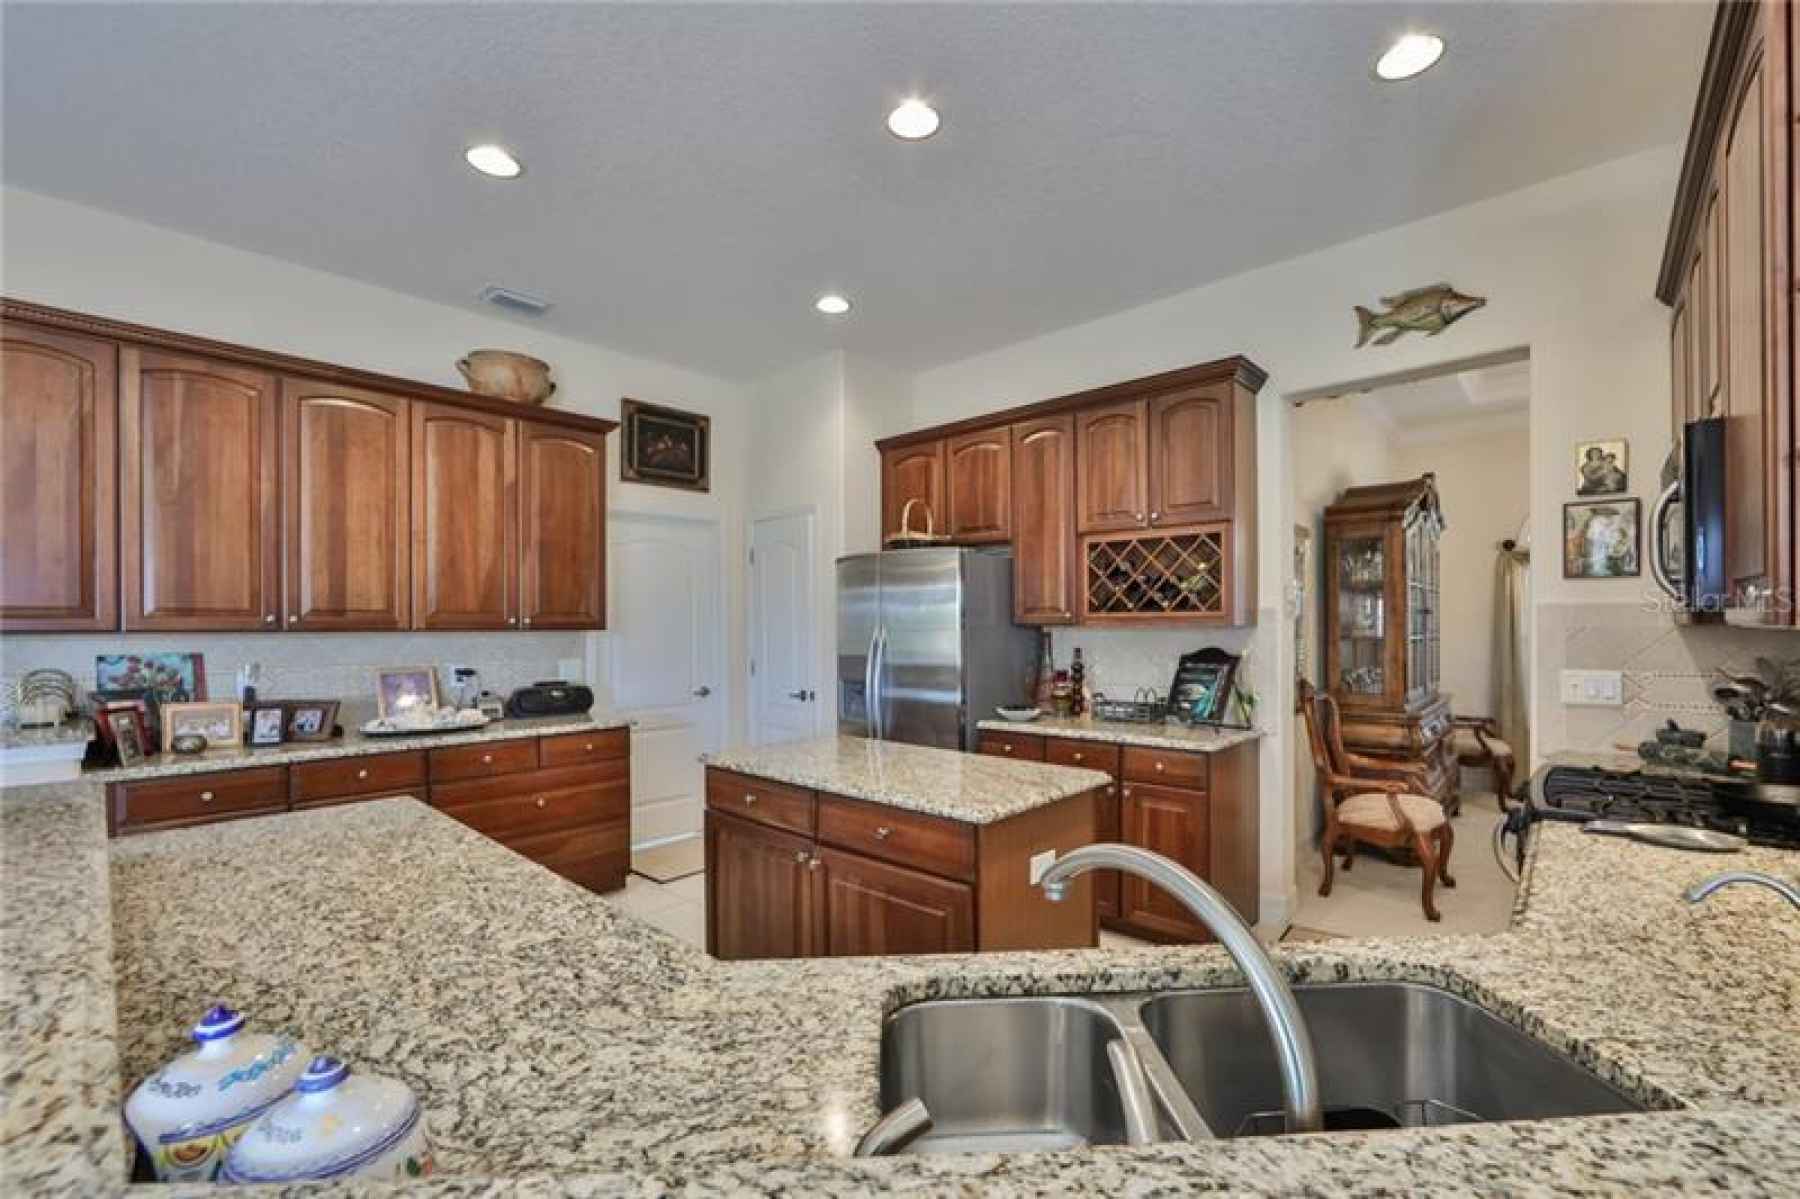 There is never too much counter space!  The laundry room is to the back left and the dining room is 